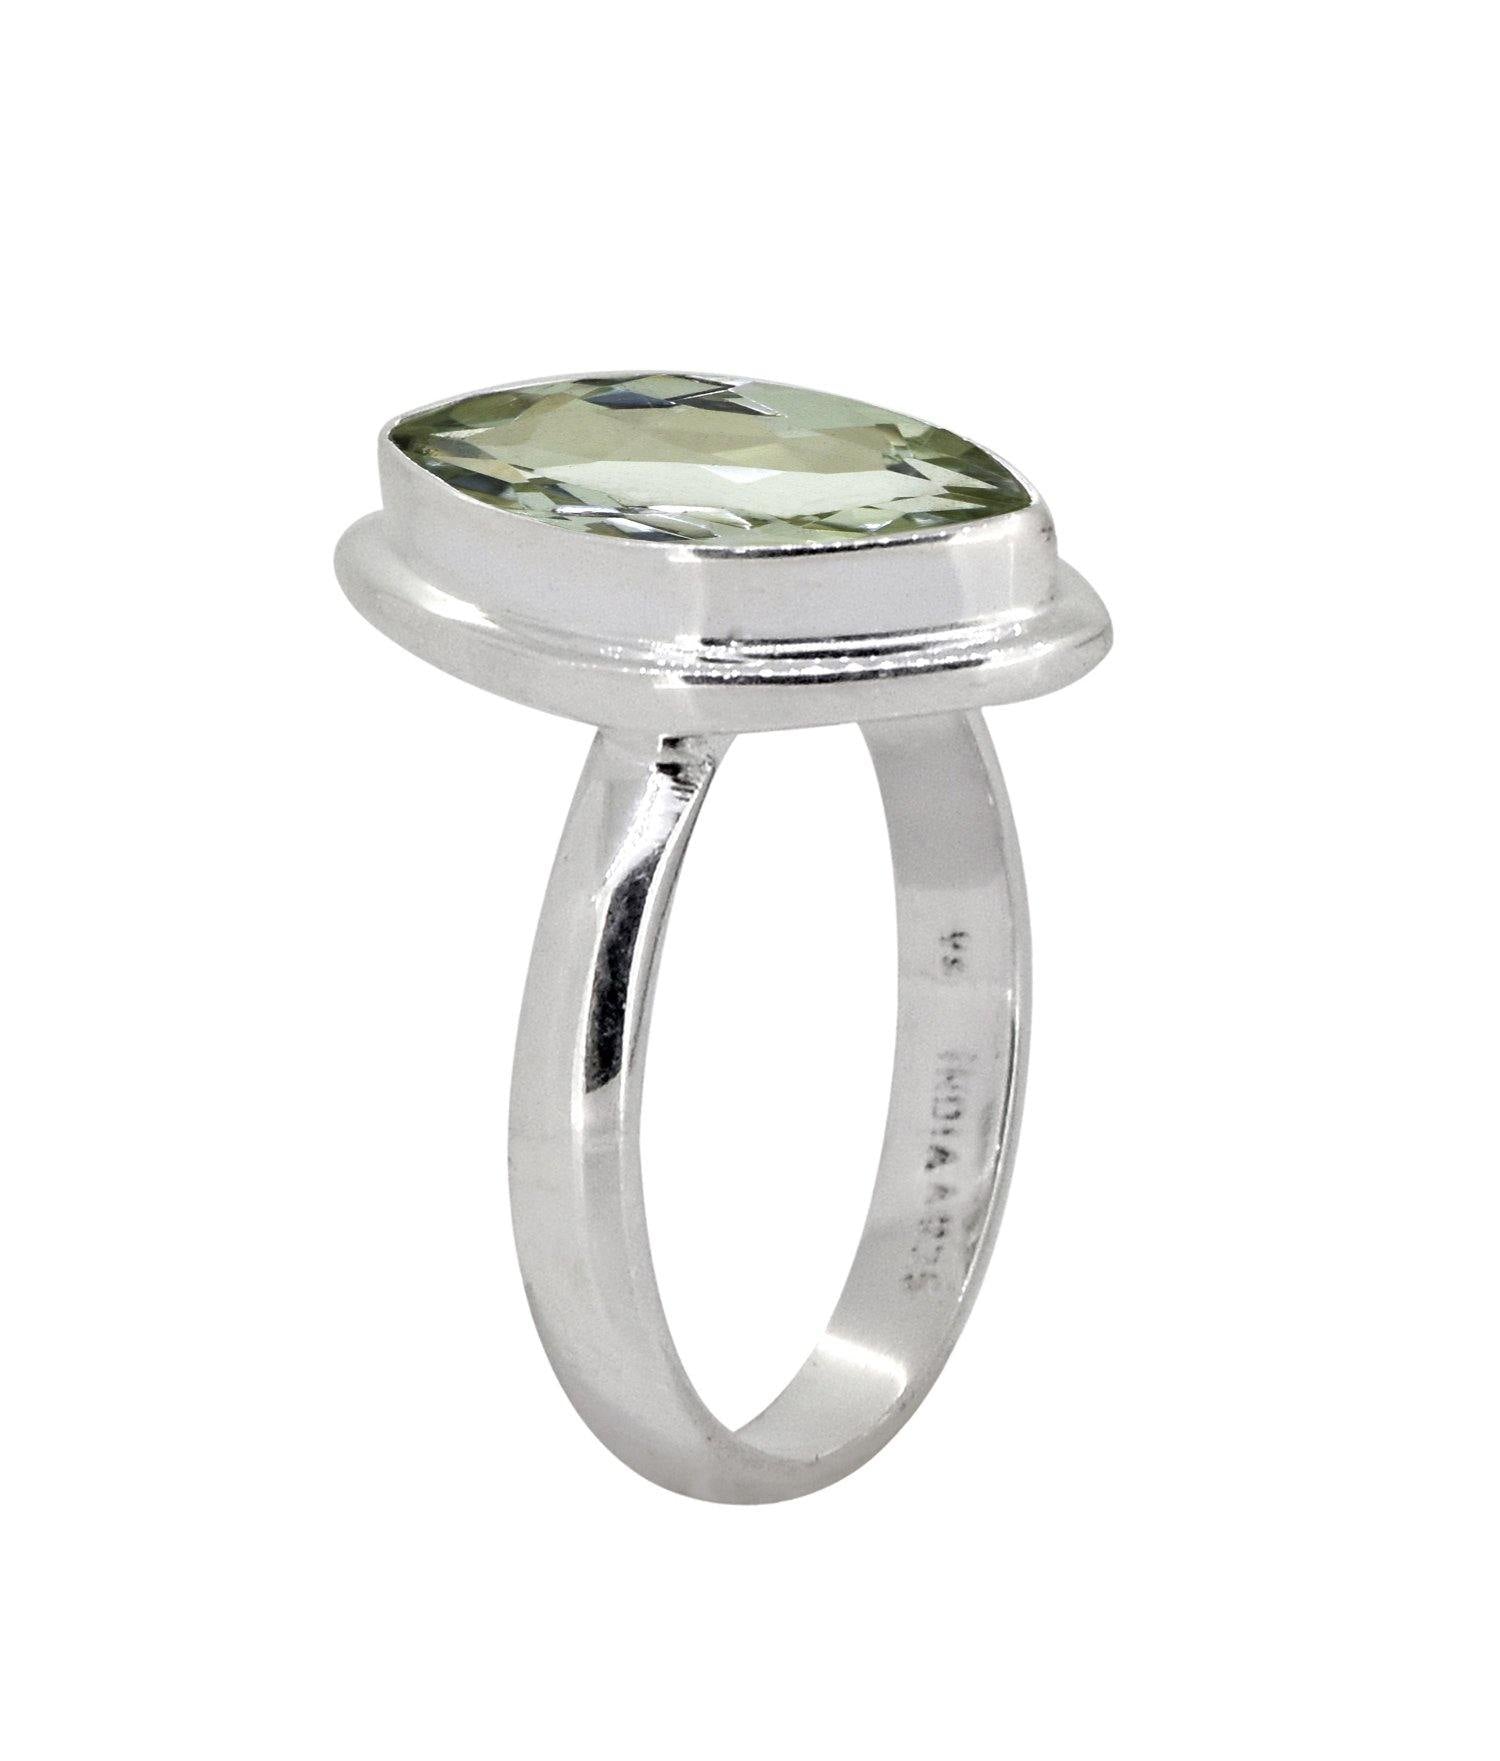 Green Amethyst Solid 925 Sterling Silver Ring Jewelry - YoTreasure